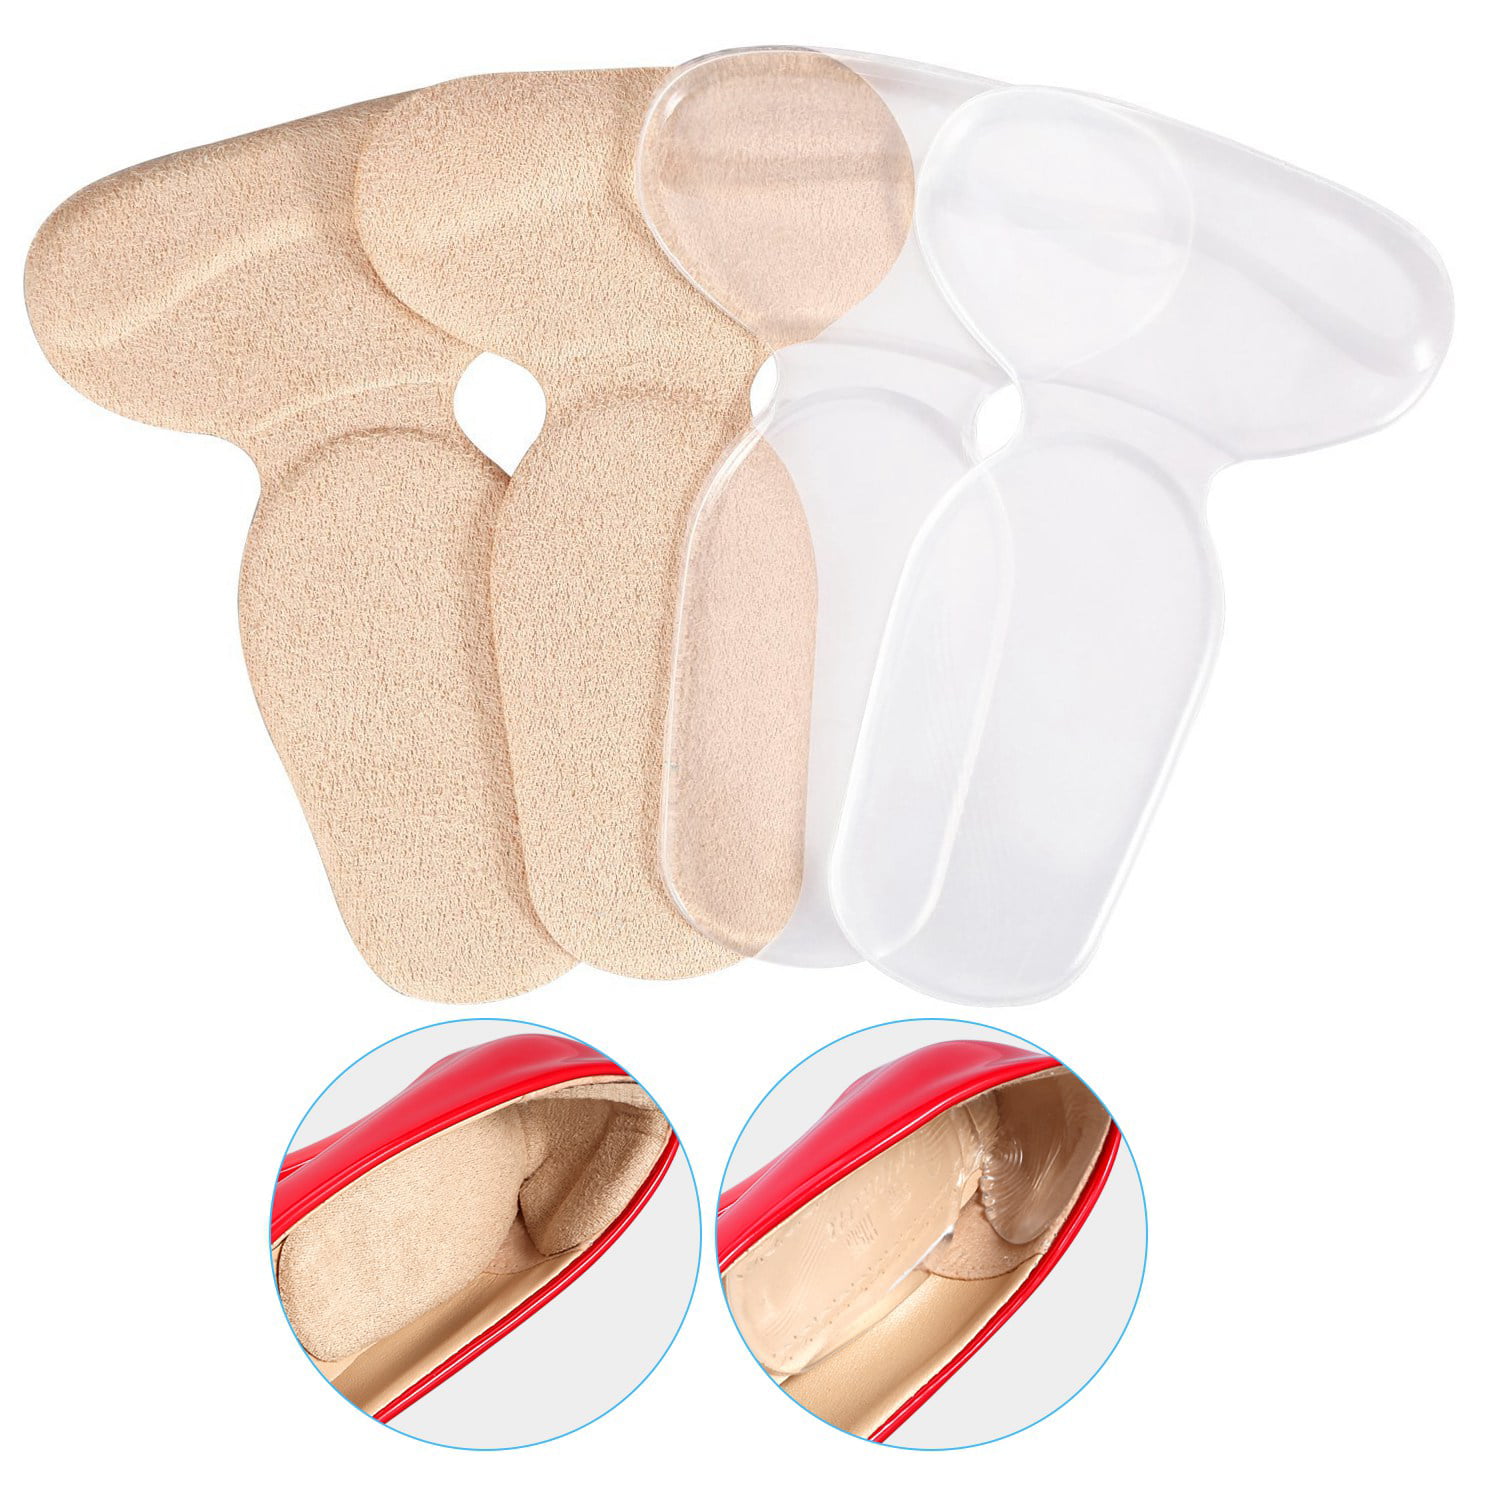 Add Extra Back Insoles 12 Heel Grips Shoes Too Big Set Thick Gel Heel Pads 